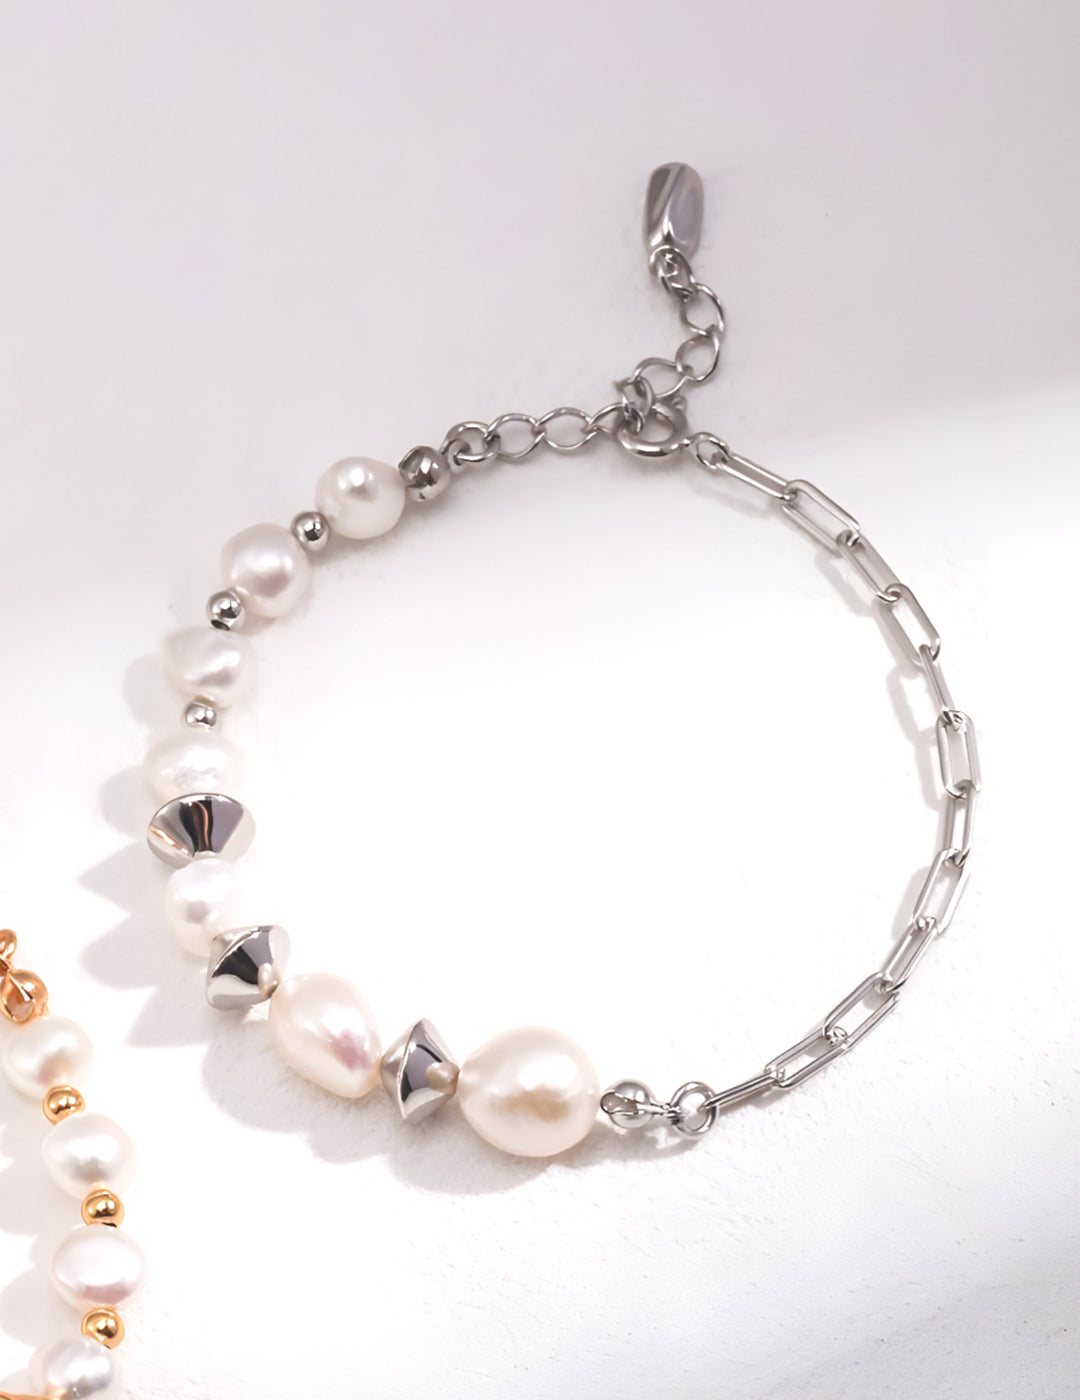 Crafted with beautiful Baroque Pearls and timeless design - perfect for any occasion - S925 Sterling Silver with 18K Gold Vermeil  - Pearl Luminance 